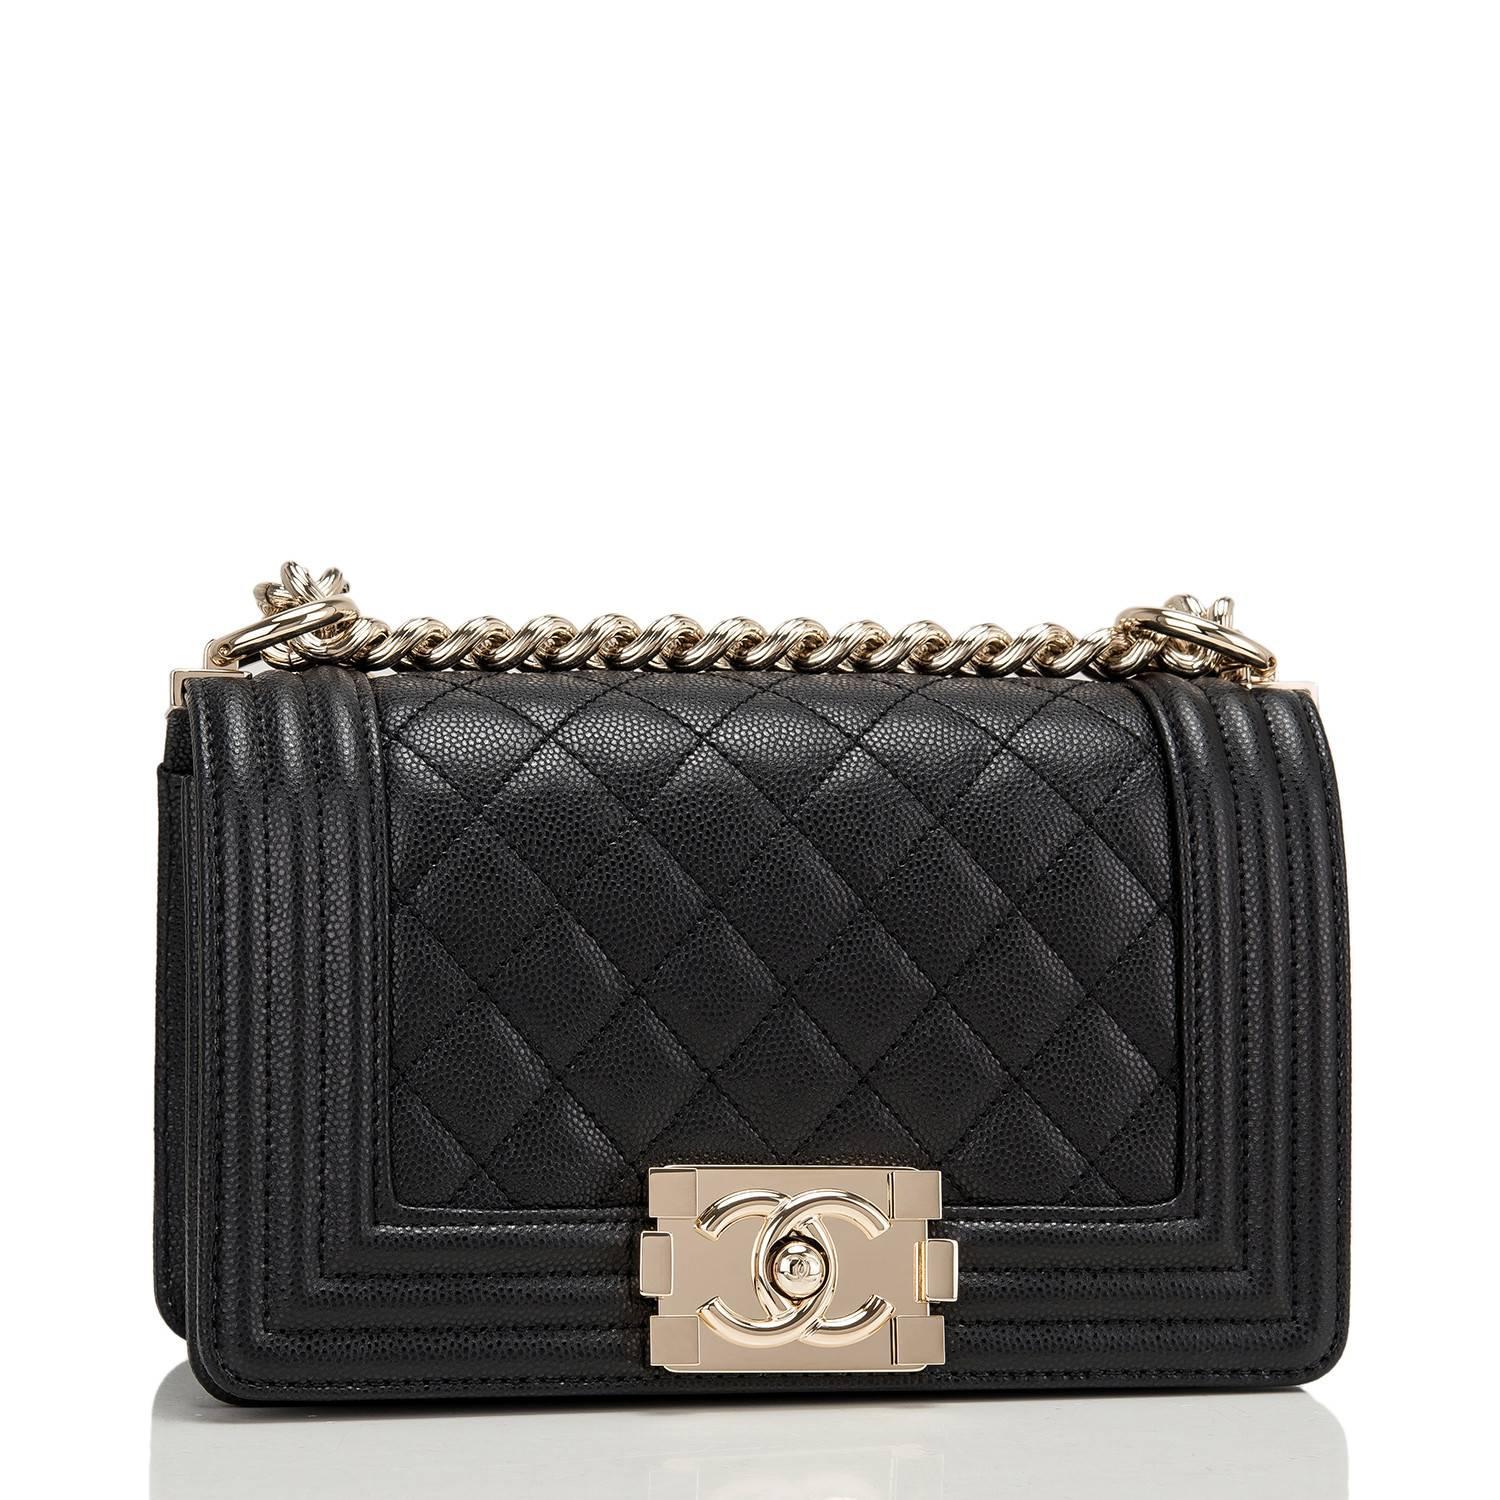 Chanel Small Boy bag of black caviar leather with light gold tone hardware.

This bag has a front flap with Le Boy CC push lock closure, smooth leather accents and light gold tone chain link and black leather padded shoulder strap.

The interior is